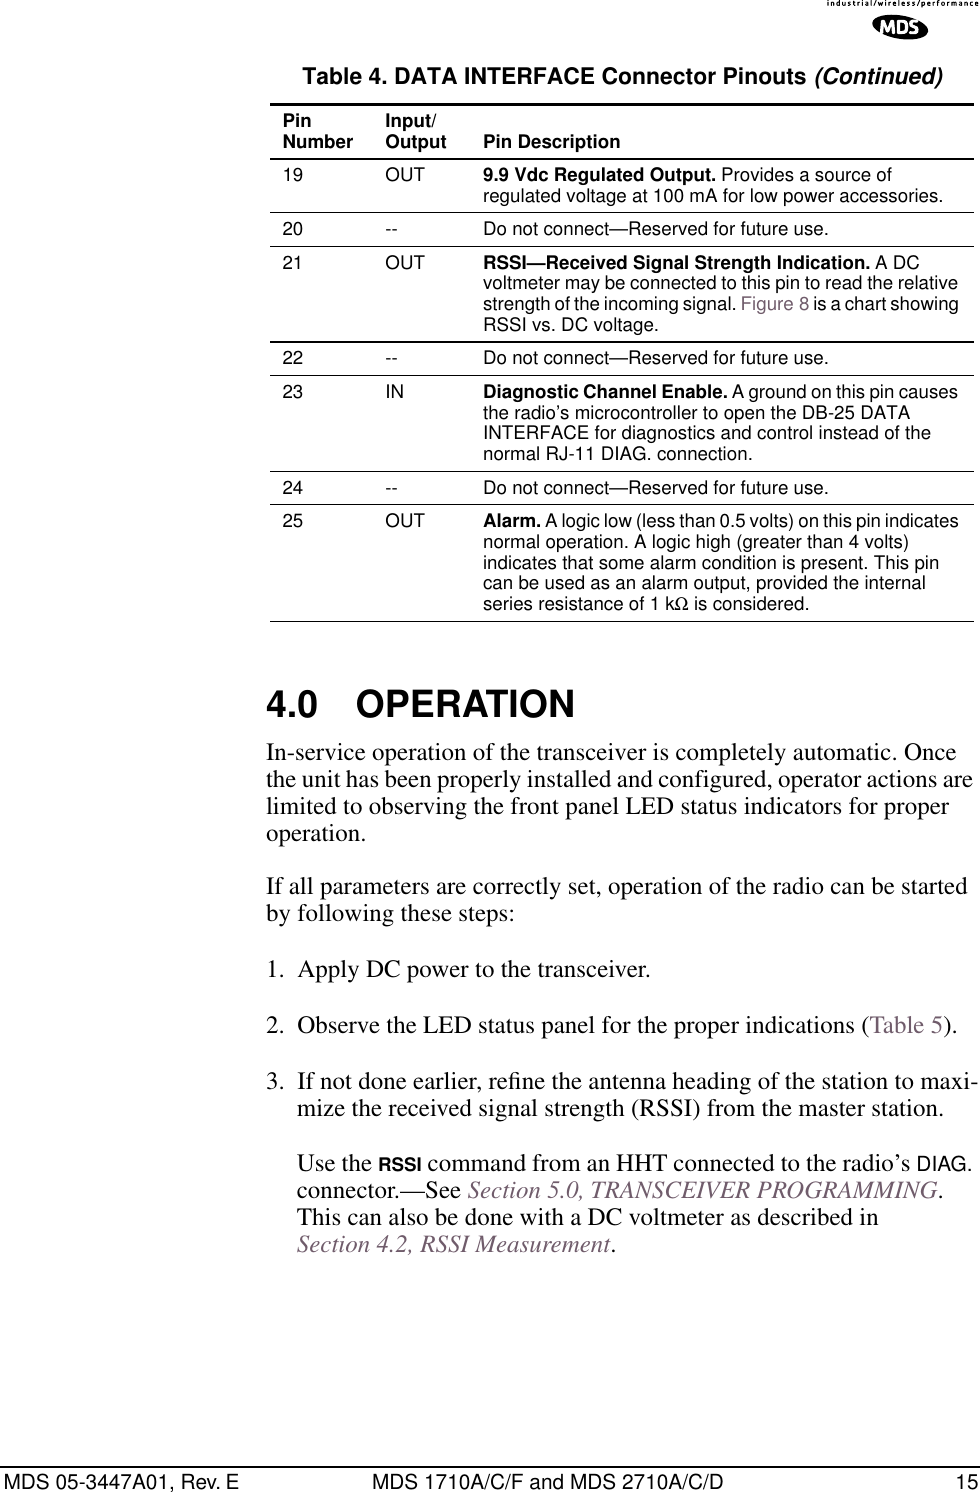 MDS 05-3447A01, Rev. E MDS 1710A/C/F and MDS 2710A/C/D 15Invisible place holder4.0 OPERATIONIn-service operation of the transceiver is completely automatic. Once the unit has been properly installed and configured, operator actions are limited to observing the front panel LED status indicators for proper operation.If all parameters are correctly set, operation of the radio can be started by following these steps:1. Apply DC power to the transceiver.2. Observe the LED status panel for the proper indications (Table 5).3. If not done earlier, reﬁne the antenna heading of the station to maxi-mize the received signal strength (RSSI) from the master station.Use the RSSI command from an HHT connected to the radio’s DIAG. connector.—See Section 5.0, TRANSCEIVER PROGRAMMING. This can also be done with a DC voltmeter as described in Section 4.2, RSSI Measurement.19 OUT 9.9 Vdc Regulated Output. Provides a source of regulated voltage at 100 mA for low power accessories.20 -- Do not connect—Reserved for future use.21 OUT RSSI—Received Signal Strength Indication. A DC voltmeter may be connected to this pin to read the relative strength of the incoming signal. Figure 8 is a chart showing RSSI vs. DC voltage.22 -- Do not connect—Reserved for future use.23 IN Diagnostic Channel Enable. A ground on this pin causes the radio’s microcontroller to open the DB-25 DATA INTERFACE for diagnostics and control instead of the normal RJ-11 DIAG. connection.24 -- Do not connect—Reserved for future use.25 OUT Alarm. A logic low (less than 0.5 volts) on this pin indicates normal operation. A logic high (greater than 4 volts) indicates that some alarm condition is present. This pin can be used as an alarm output, provided the internal series resistance of 1 kΩ is considered.Table 4. DATA INTERFACE Connector Pinouts (Continued)PinNumber Input/Output Pin Description